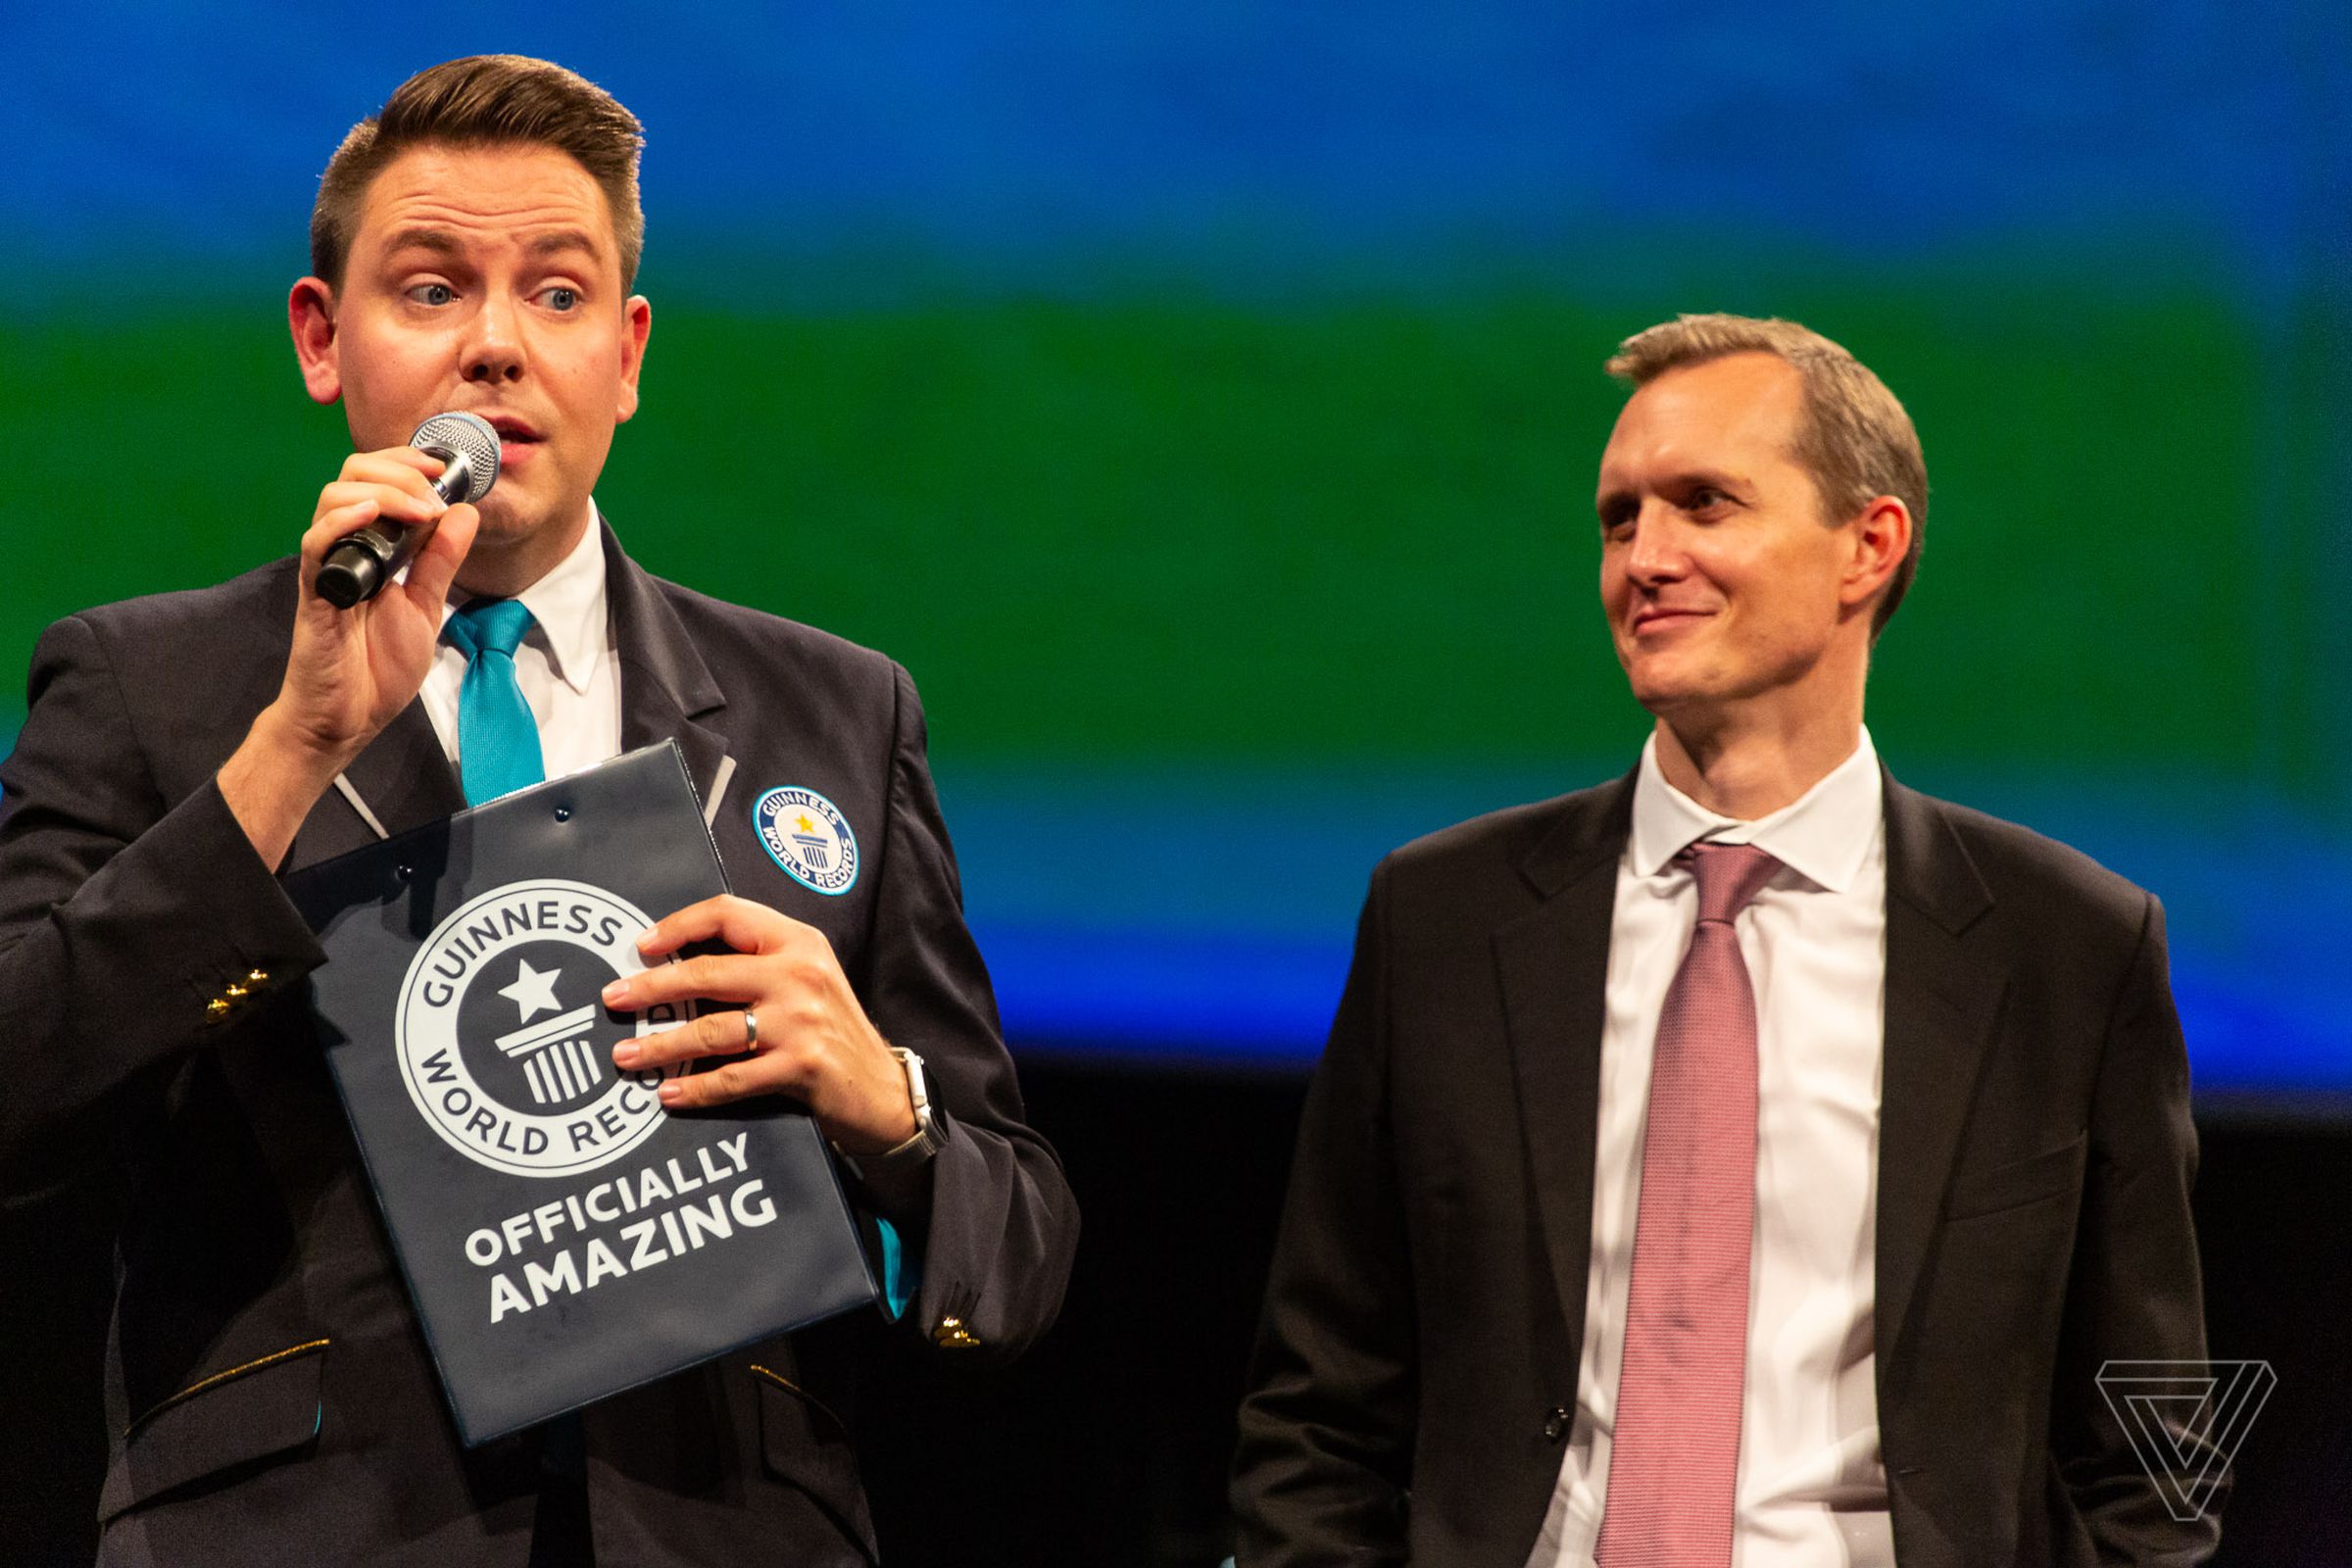 A representative for the Guinness World Records (left) presented a new award to Virgin Galactic CEO George Whitesides (right).